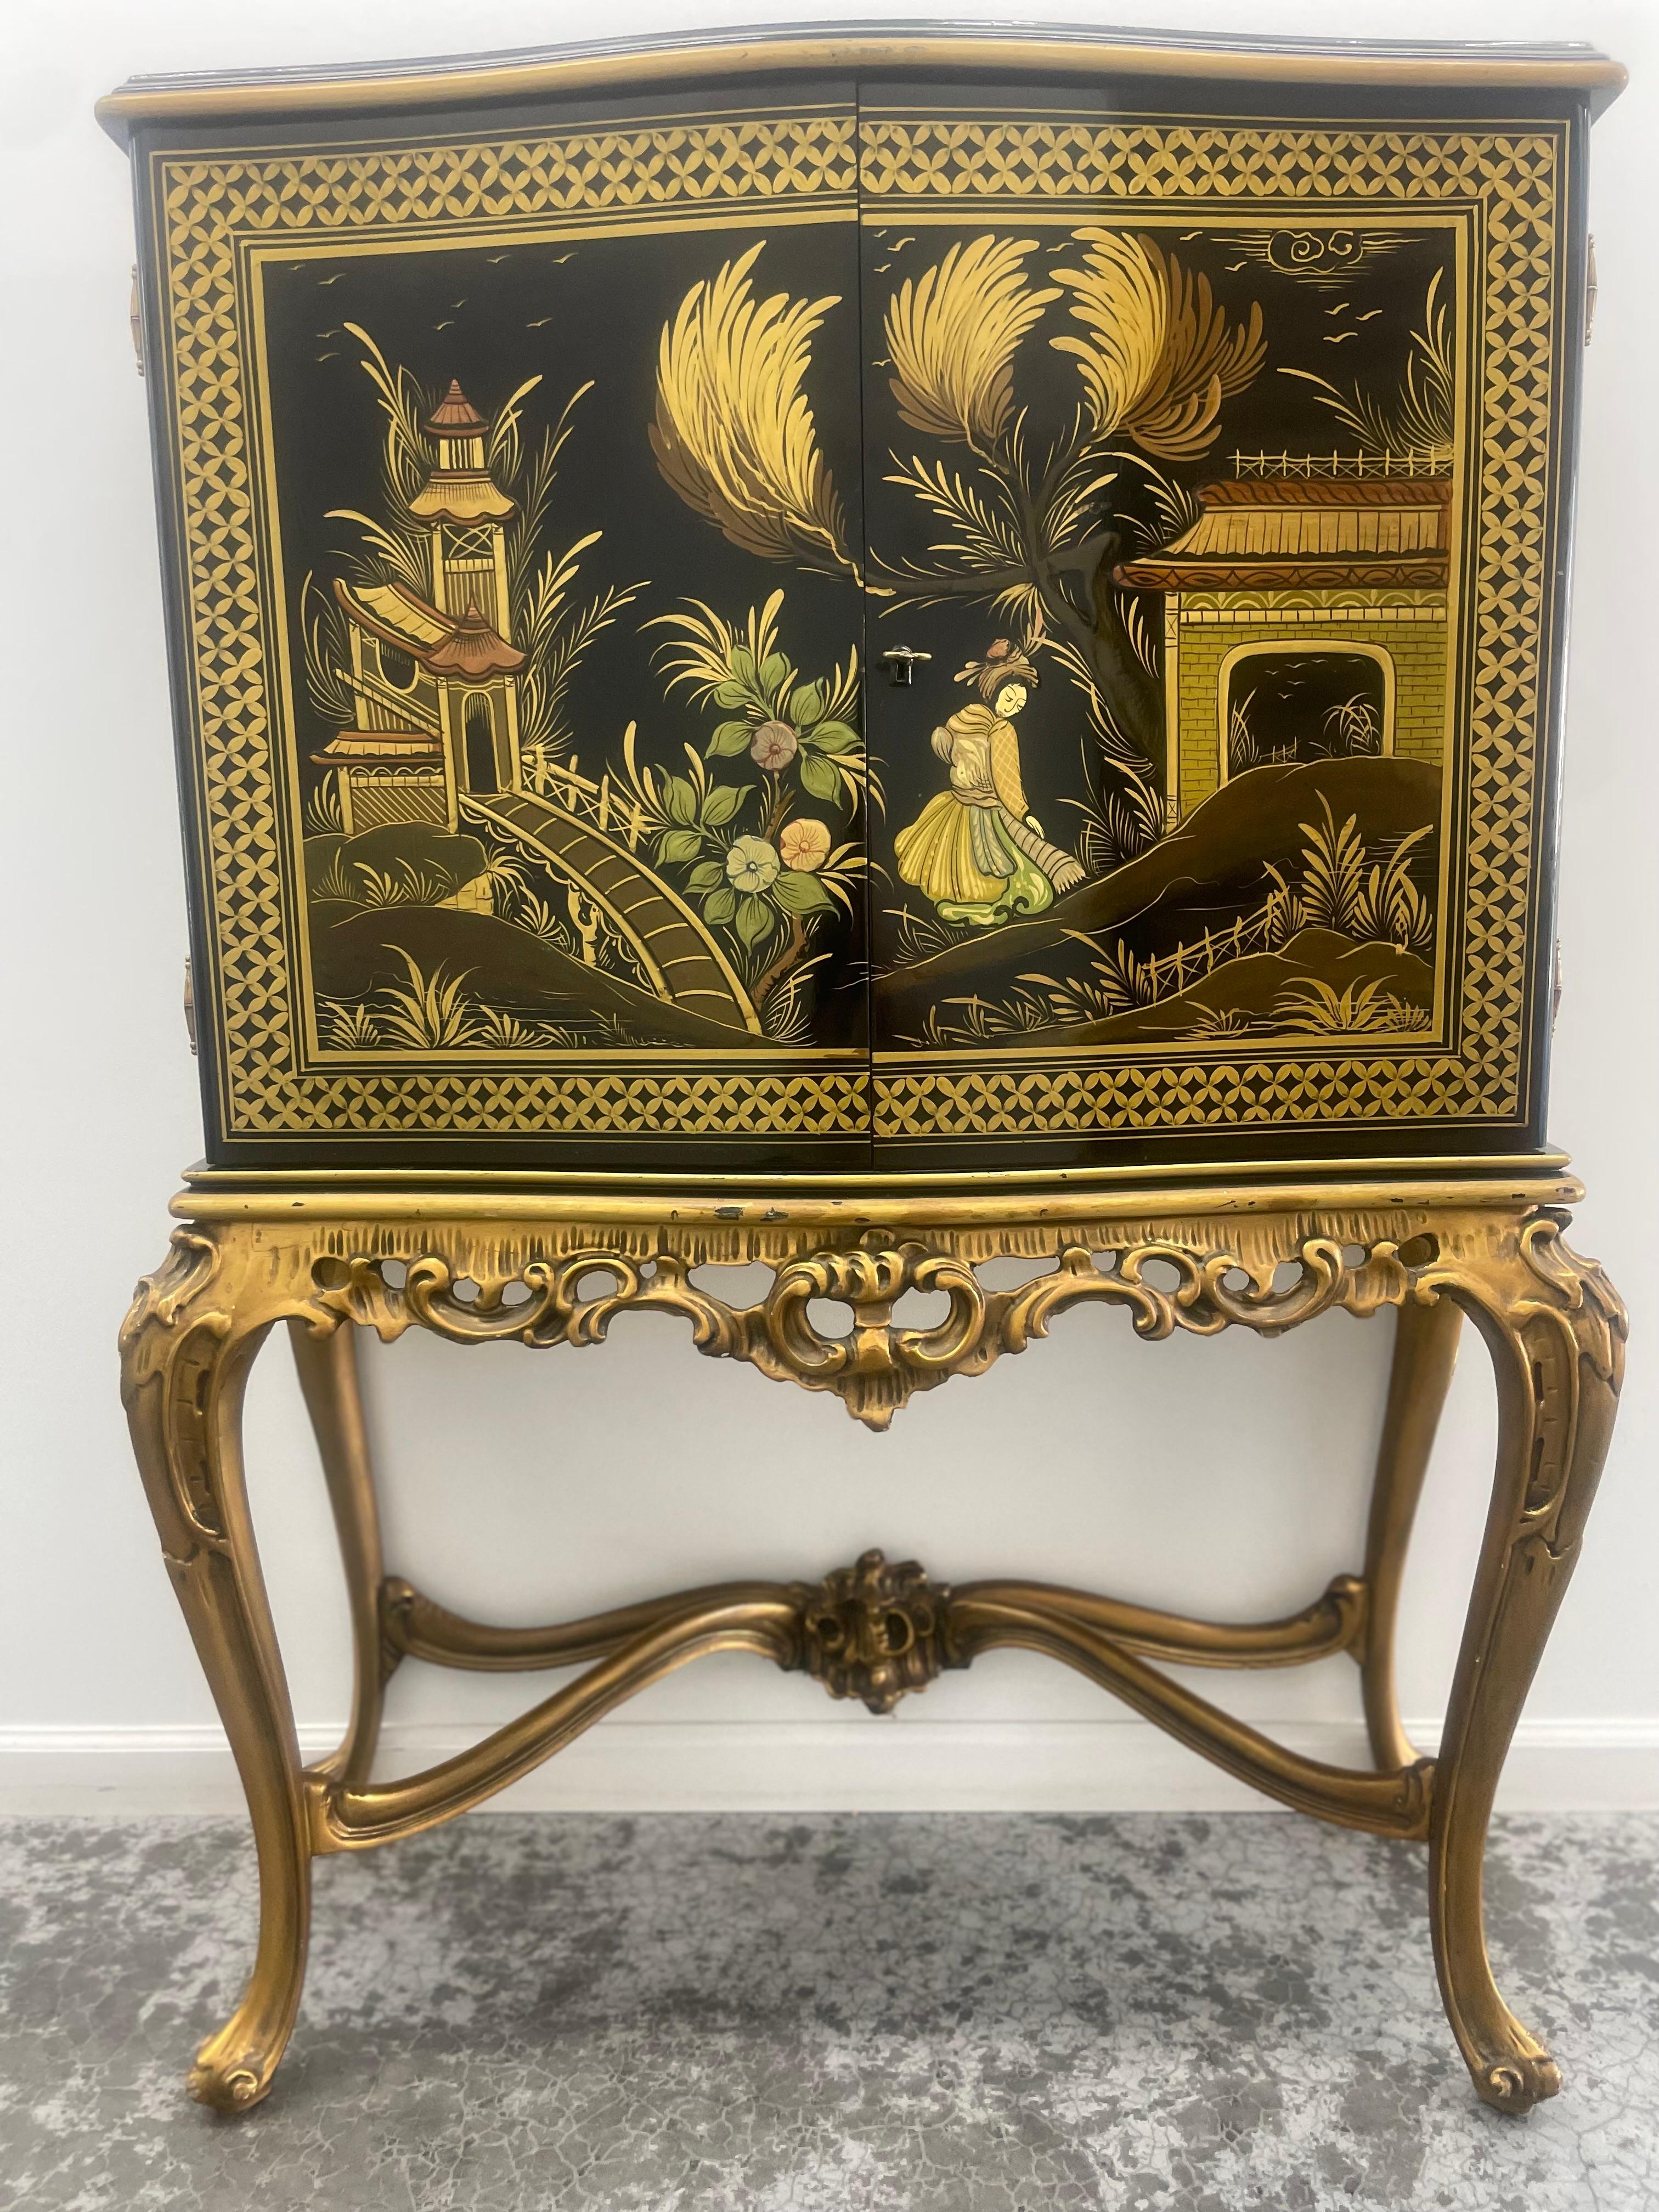 Sourced From an Estate in Saint-Malo, France, this is a Stunning 19th Century Petite Rococo Style Asian Dry Bar. It has Chinoiserie Hand Painted Scenes. 

This Chinoiserie-Style Liquor Cabinet is on a beautiful ornate stand. It is solid wood, with